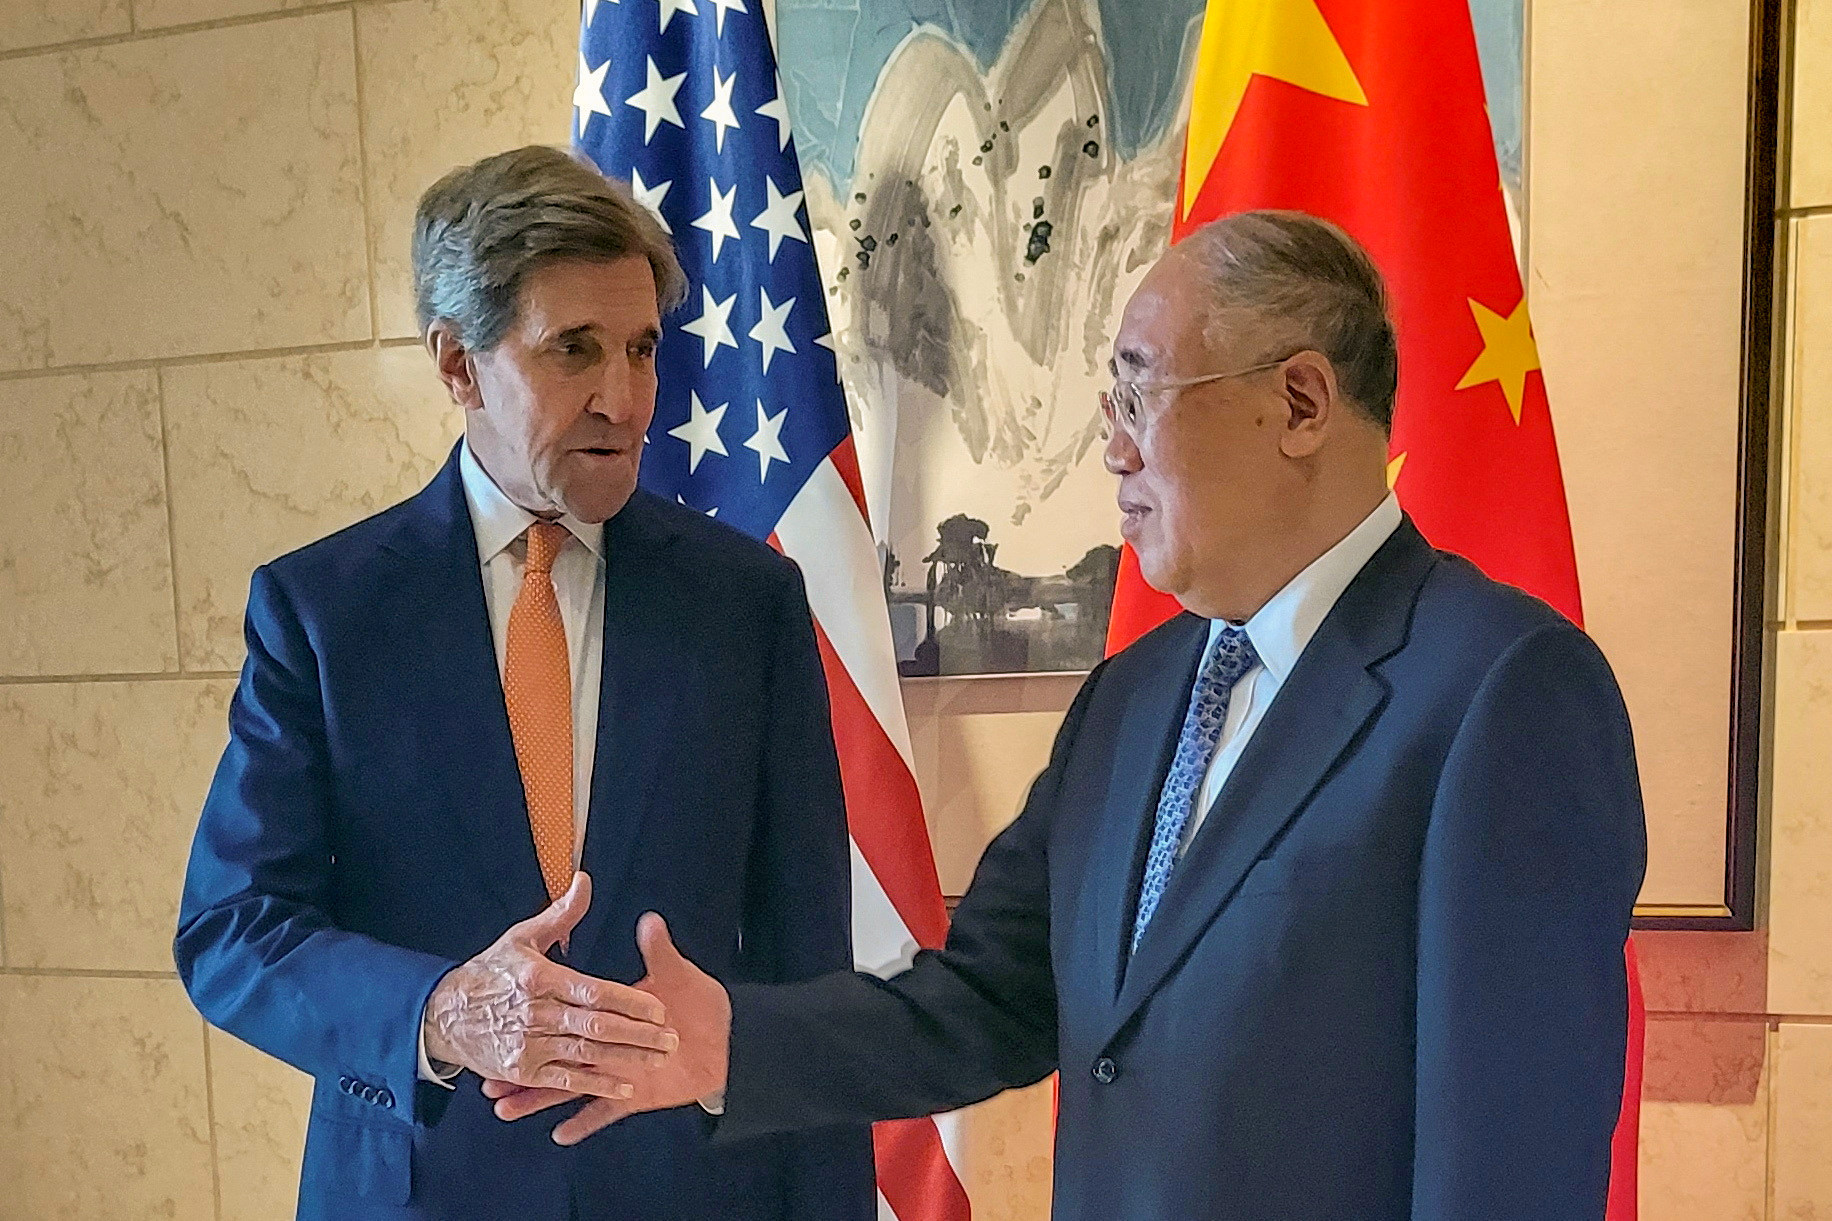 US climate envoy John Kerry meets his Chinese counterpart Xie Zhenhua in Beijing on July 17. Photo: Reuters